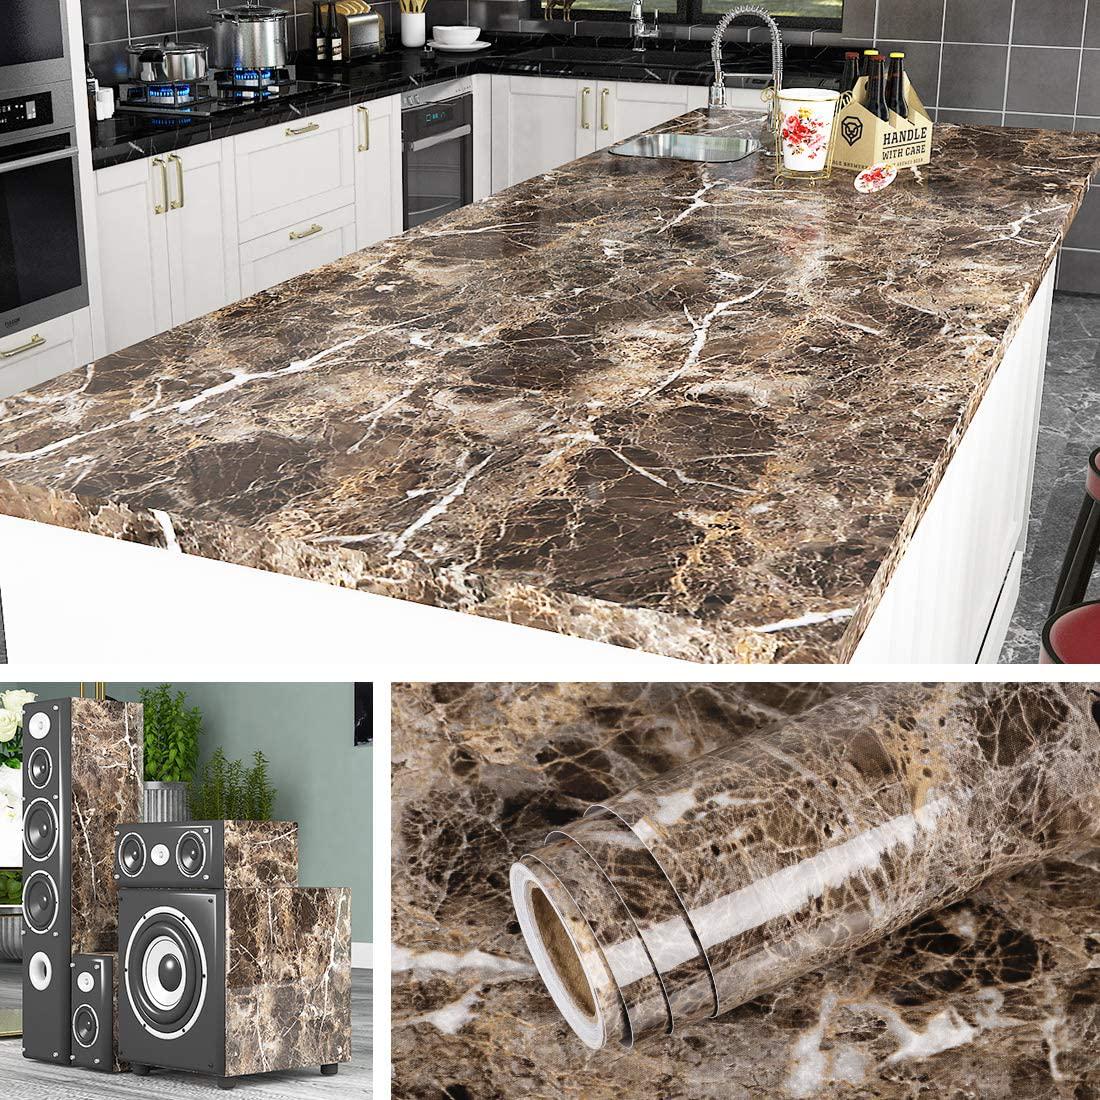 Livelynine, Livelynine 197 X 24 Inch Wide Countertop Contact Paper Brown Marble Wallpaper for Kitchen Countertop Peel and Stick Wallpaper for Bathroom Furniture Granite Countertop Paper Table Desk Cover